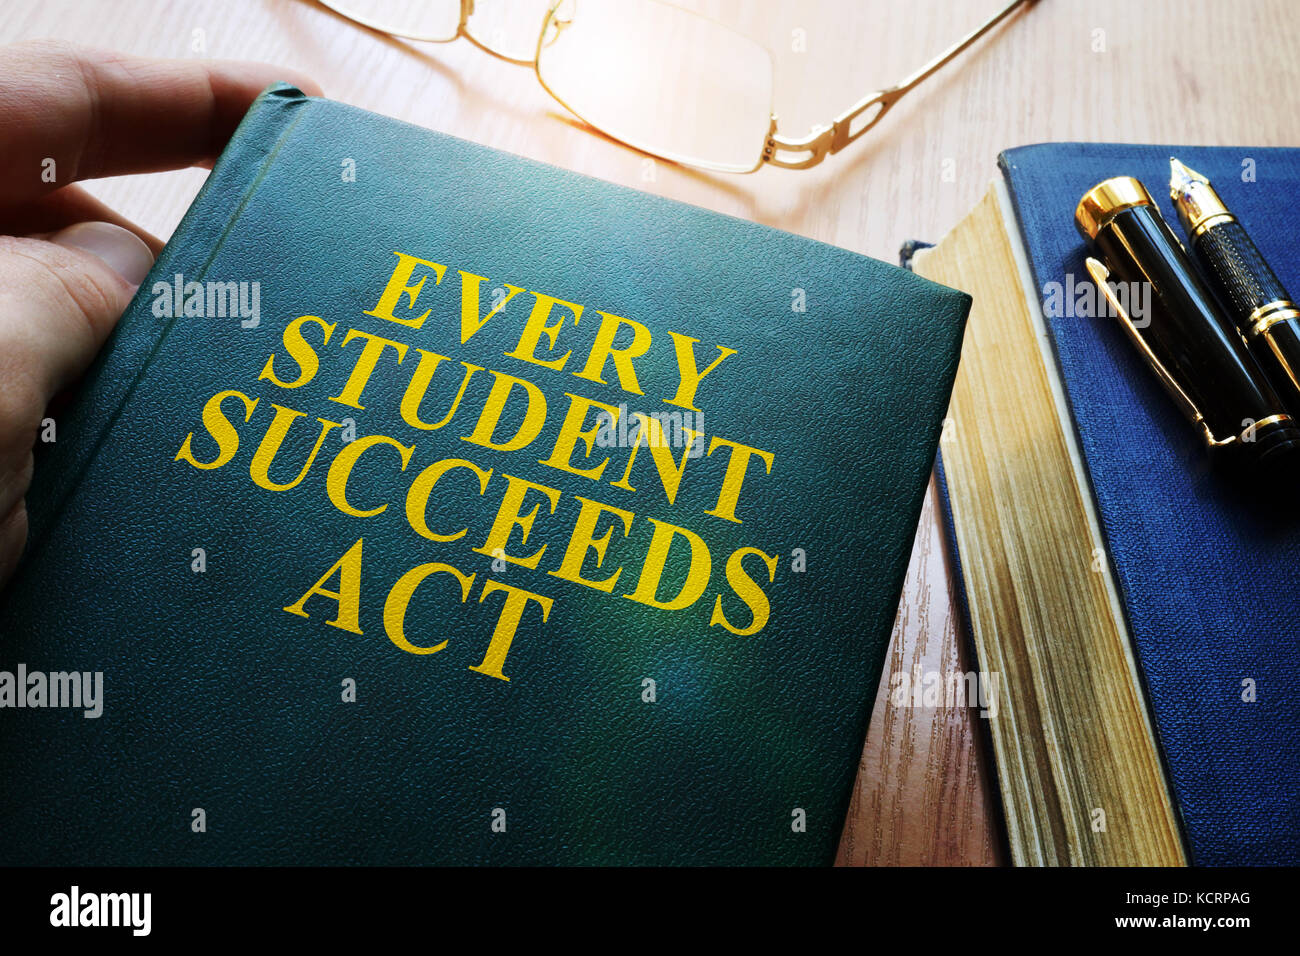 Every Student Succeeds Act ESSA on a desk. Stock Photo